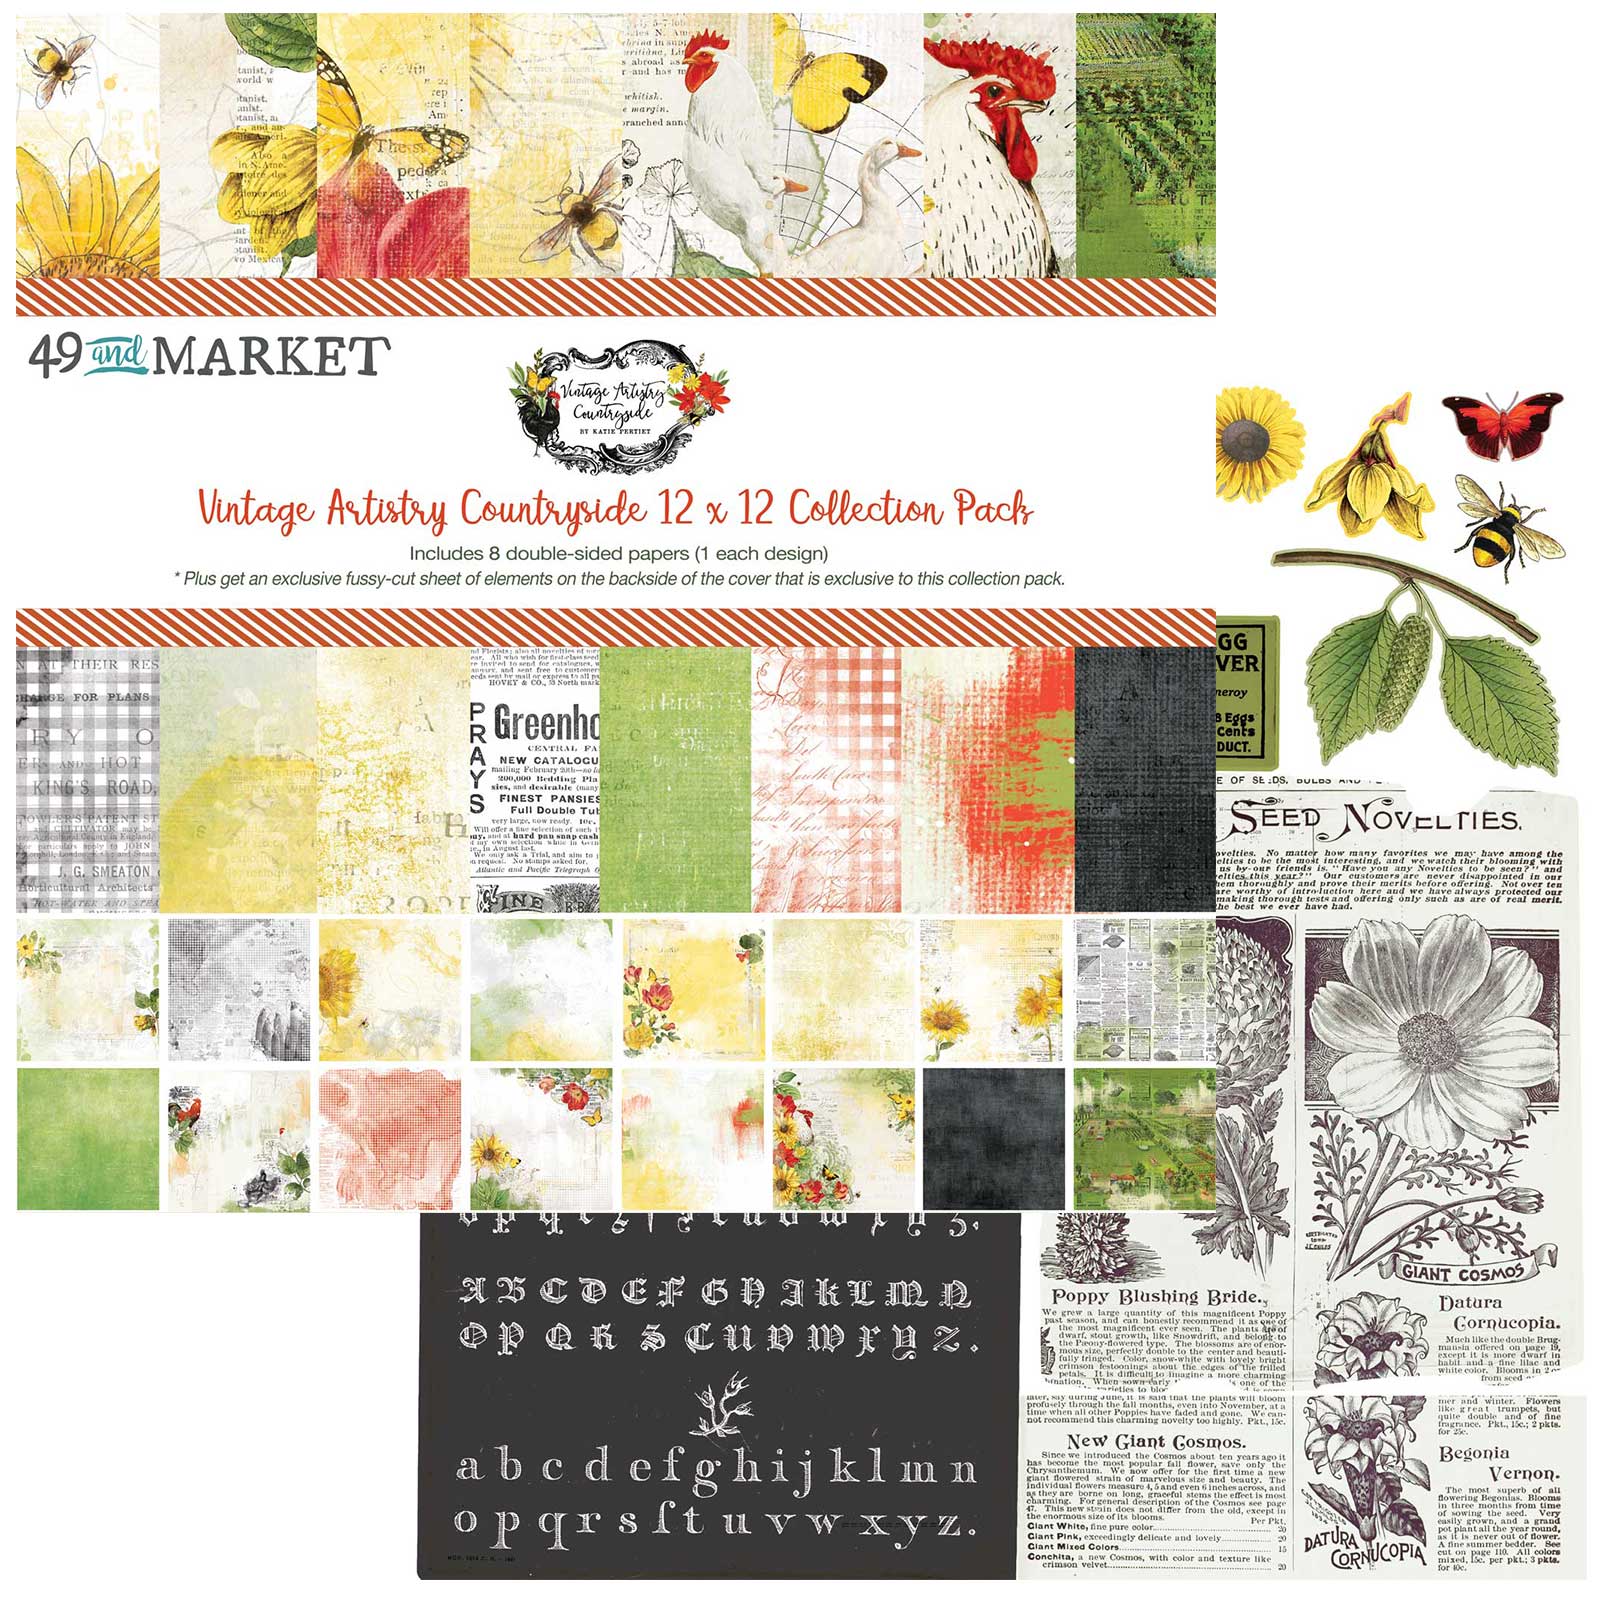 49 and Market-Vintage Artistry-Countryside Collection Pack